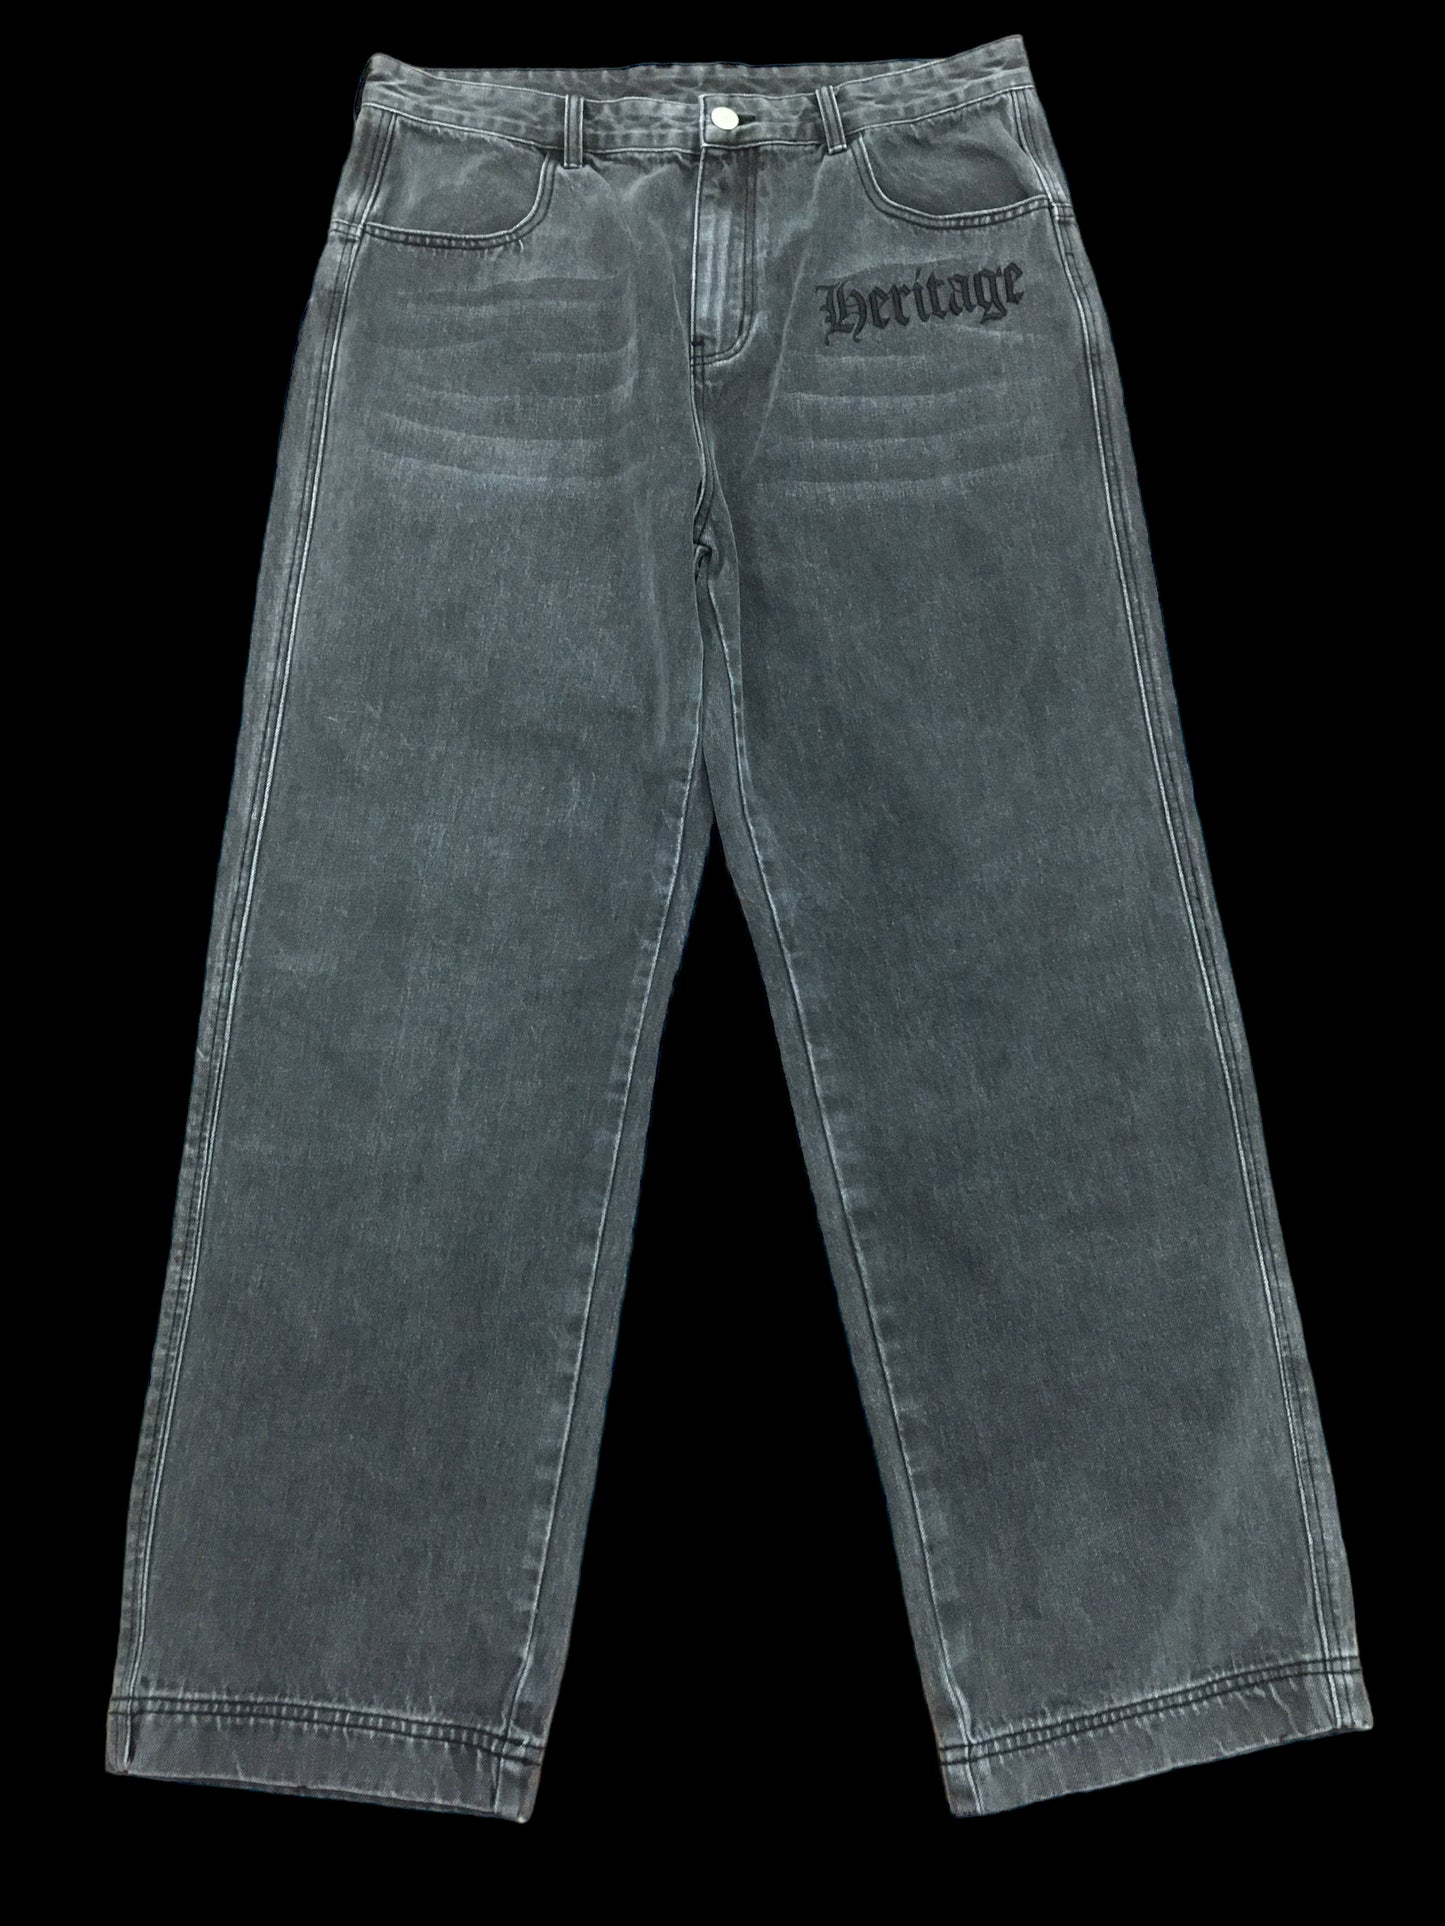 Heritage White Tiger Jeans